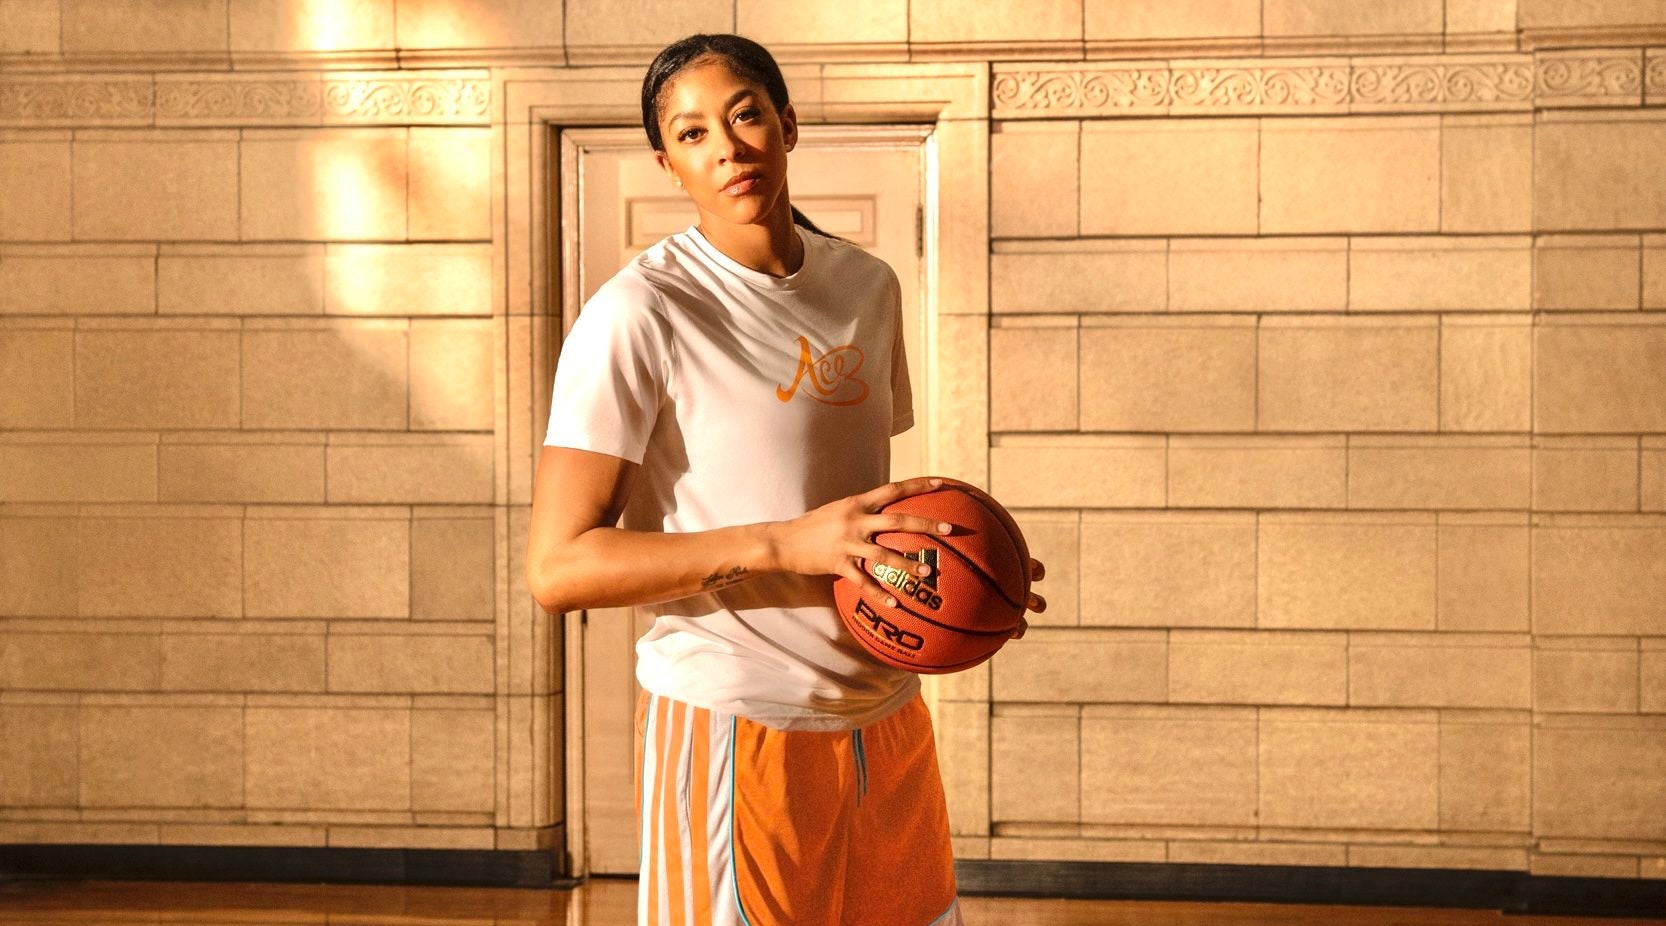 WNBA Star Candace Parker's Favorite Love Language Is Support And